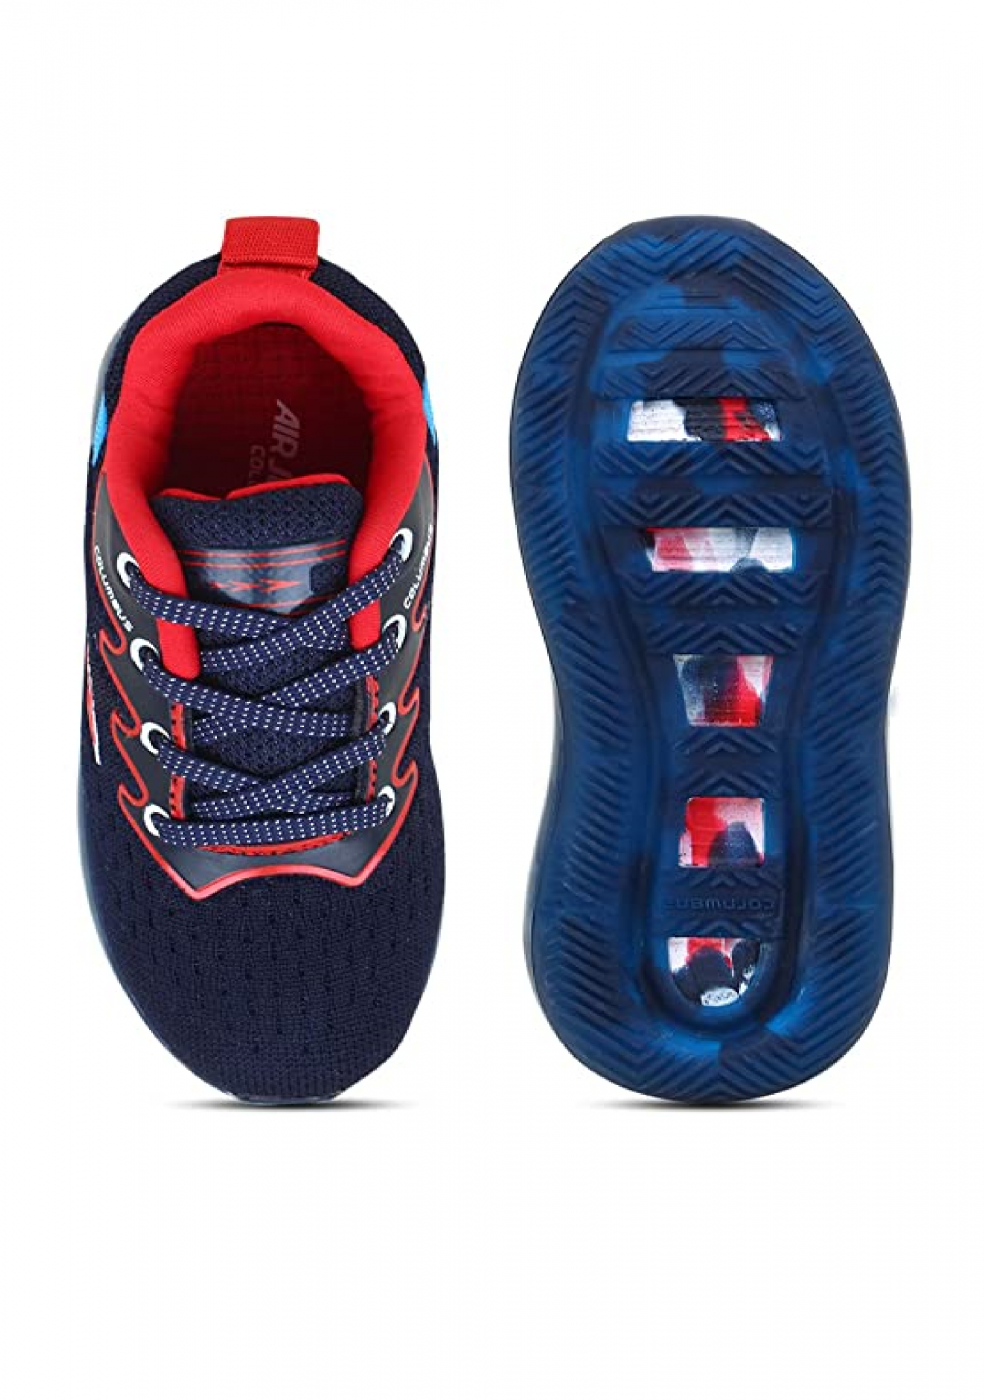 Columbus Blue Kids Sports Shoes With laces